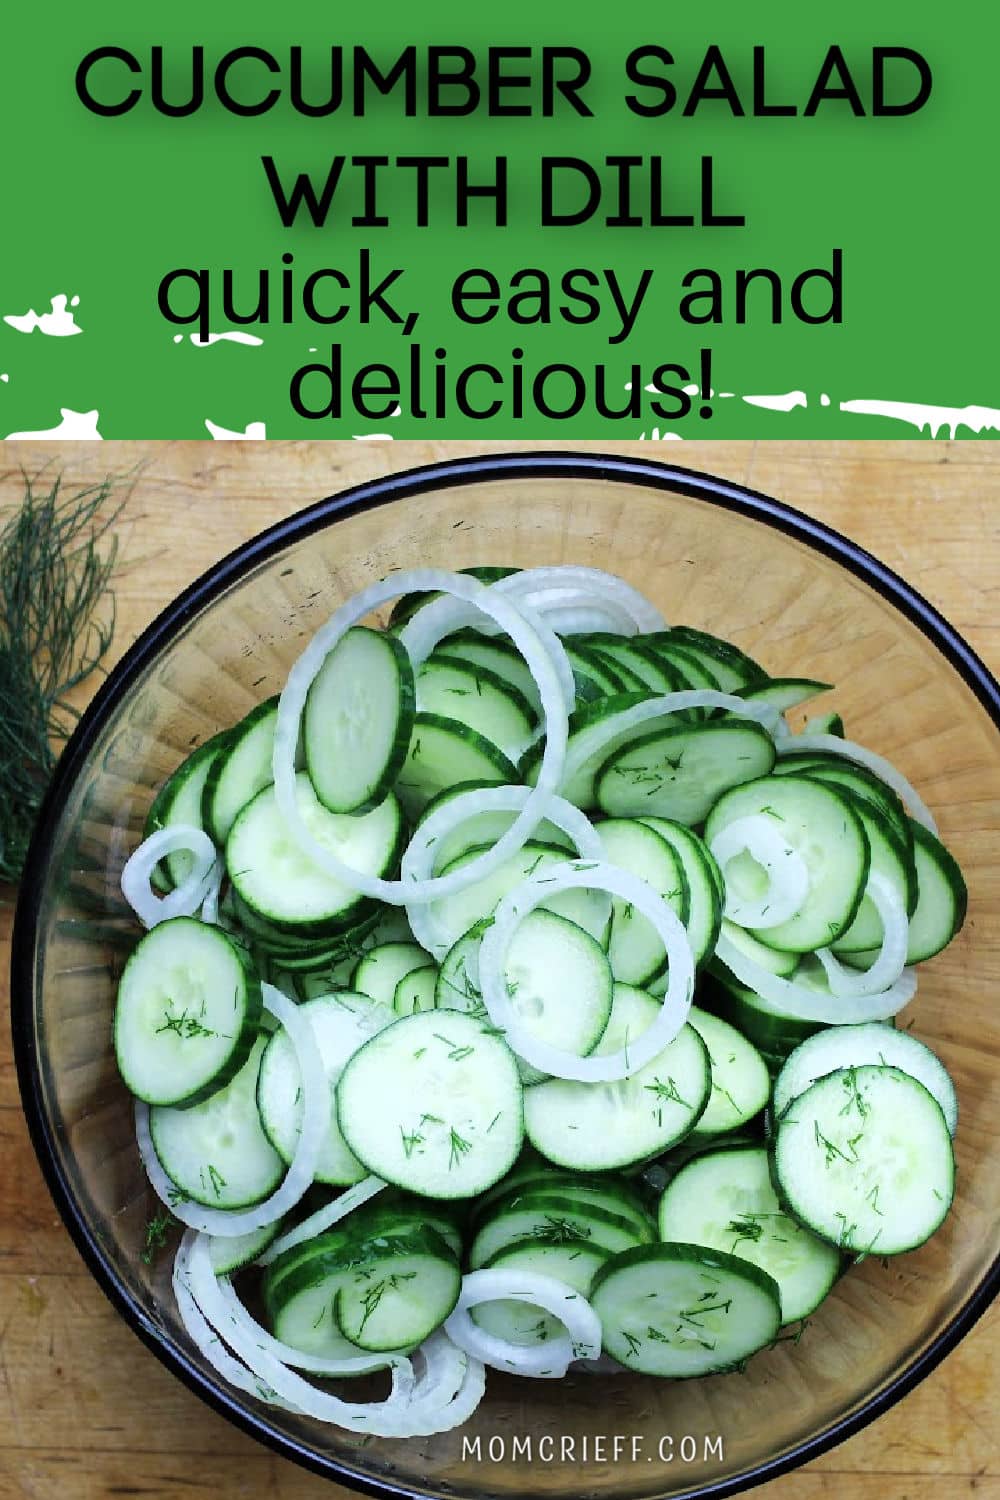 cucumber salad with dill with text overlay stating it is a cucumber salad.